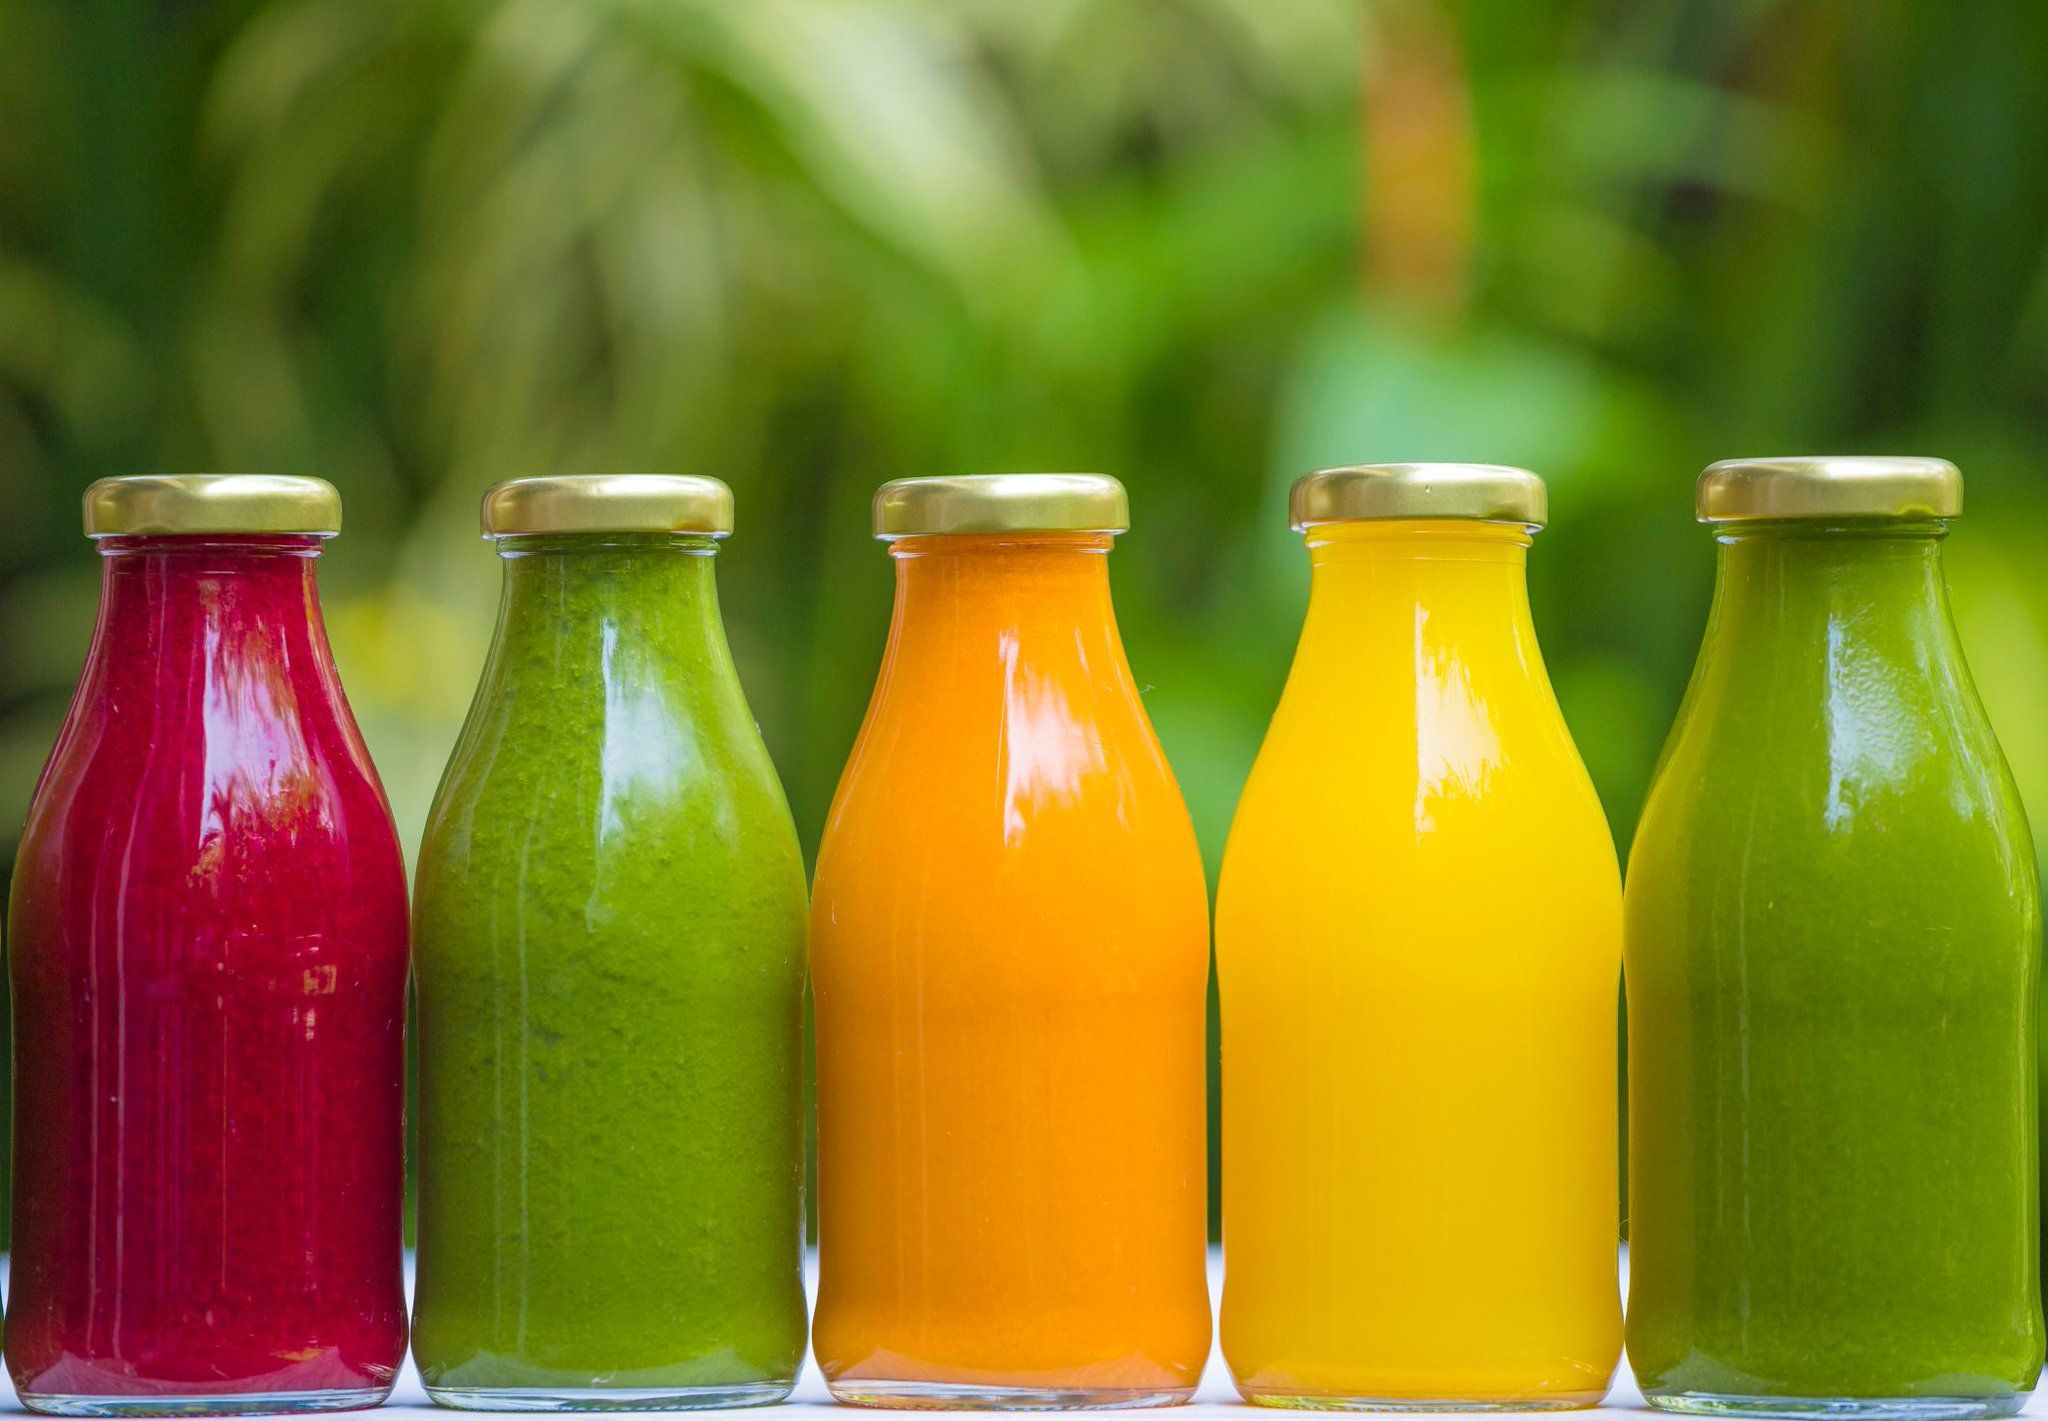 Cold-Pressed Juice Market: A Fresh Look at Trends, Industry Analysis, Challenges & Opportunities - WriteUpCafe.com